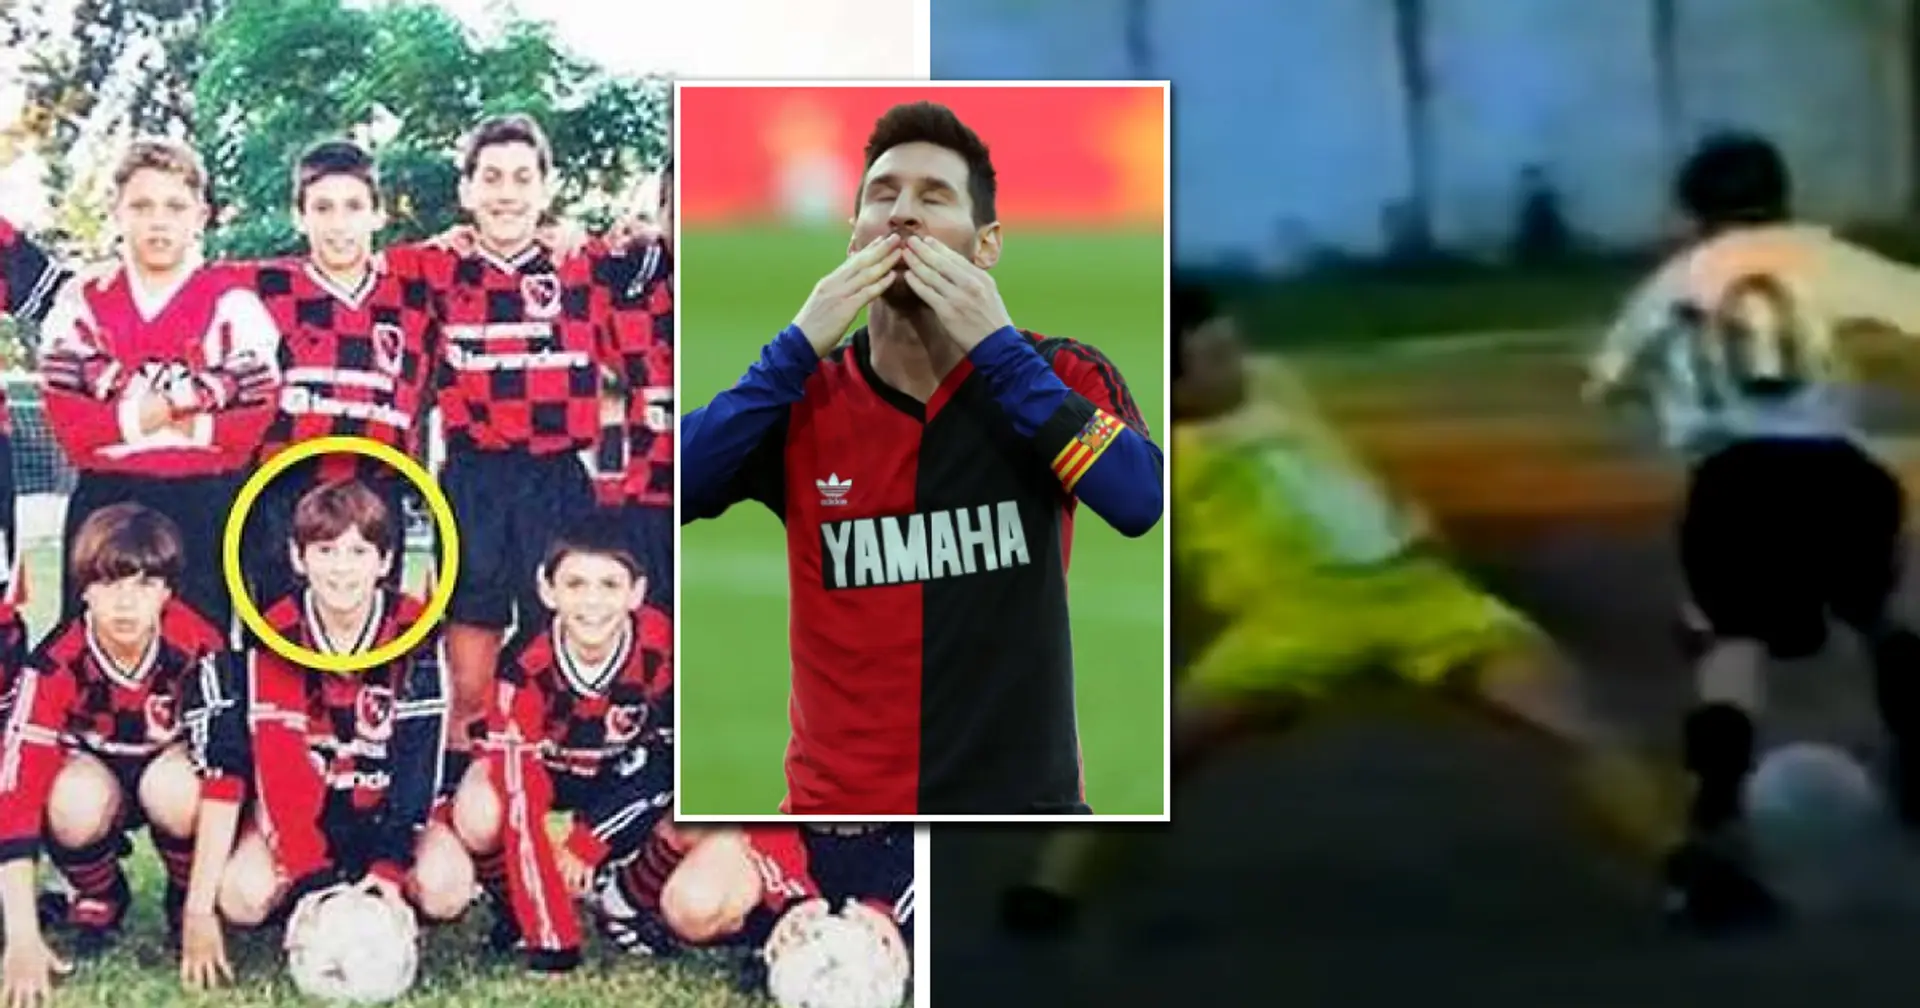 How is Leo Messi's first club Newell's Old Boys doing these days? 